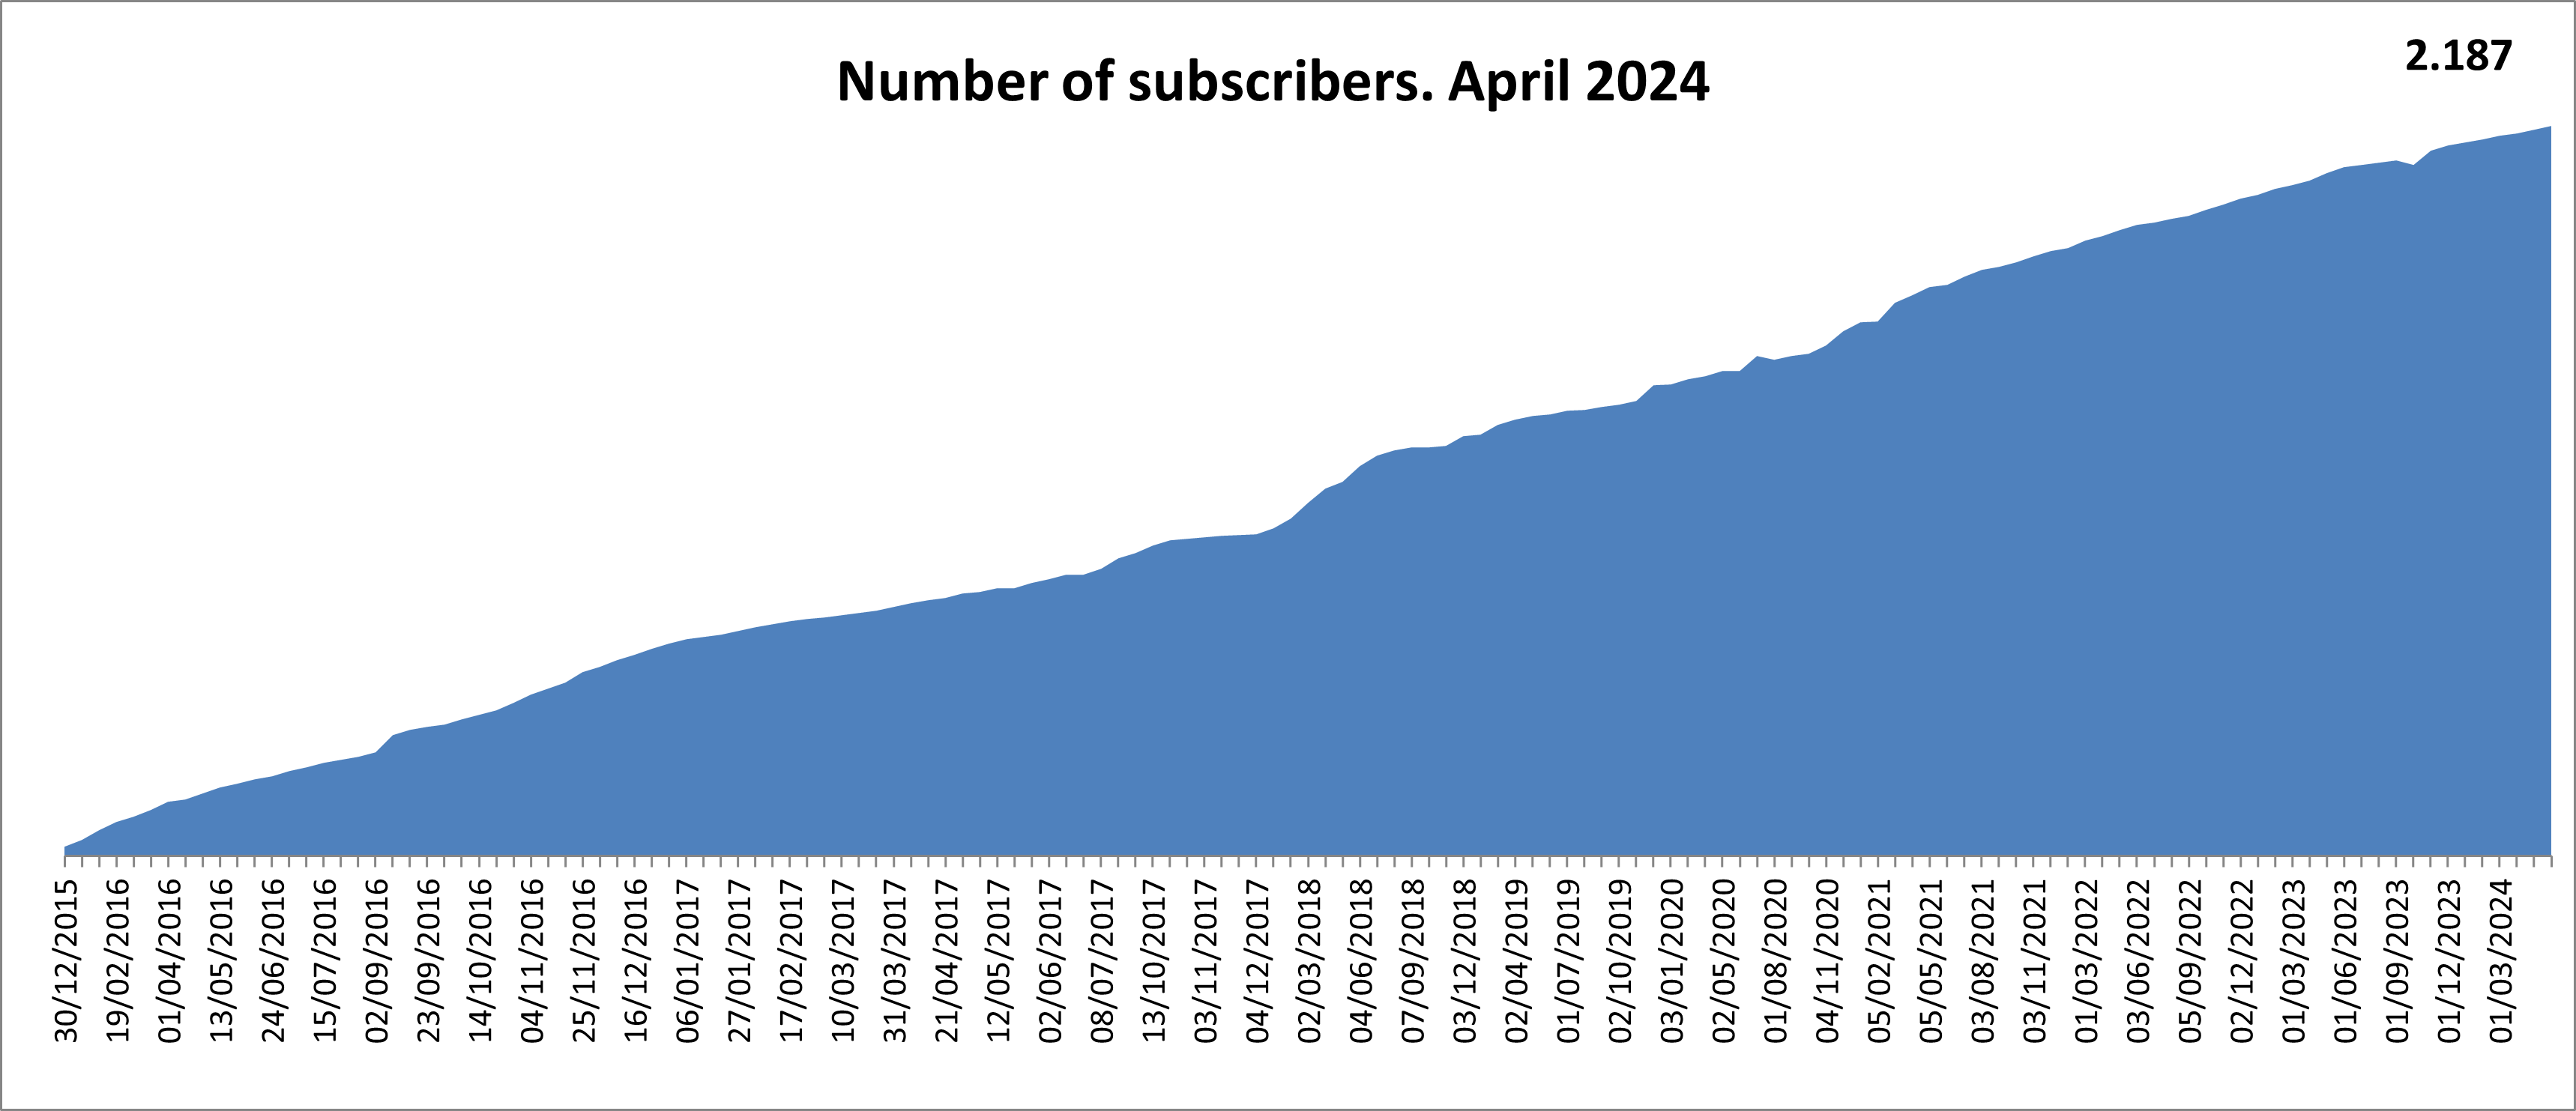 Number of subscribers 2008. January 2023